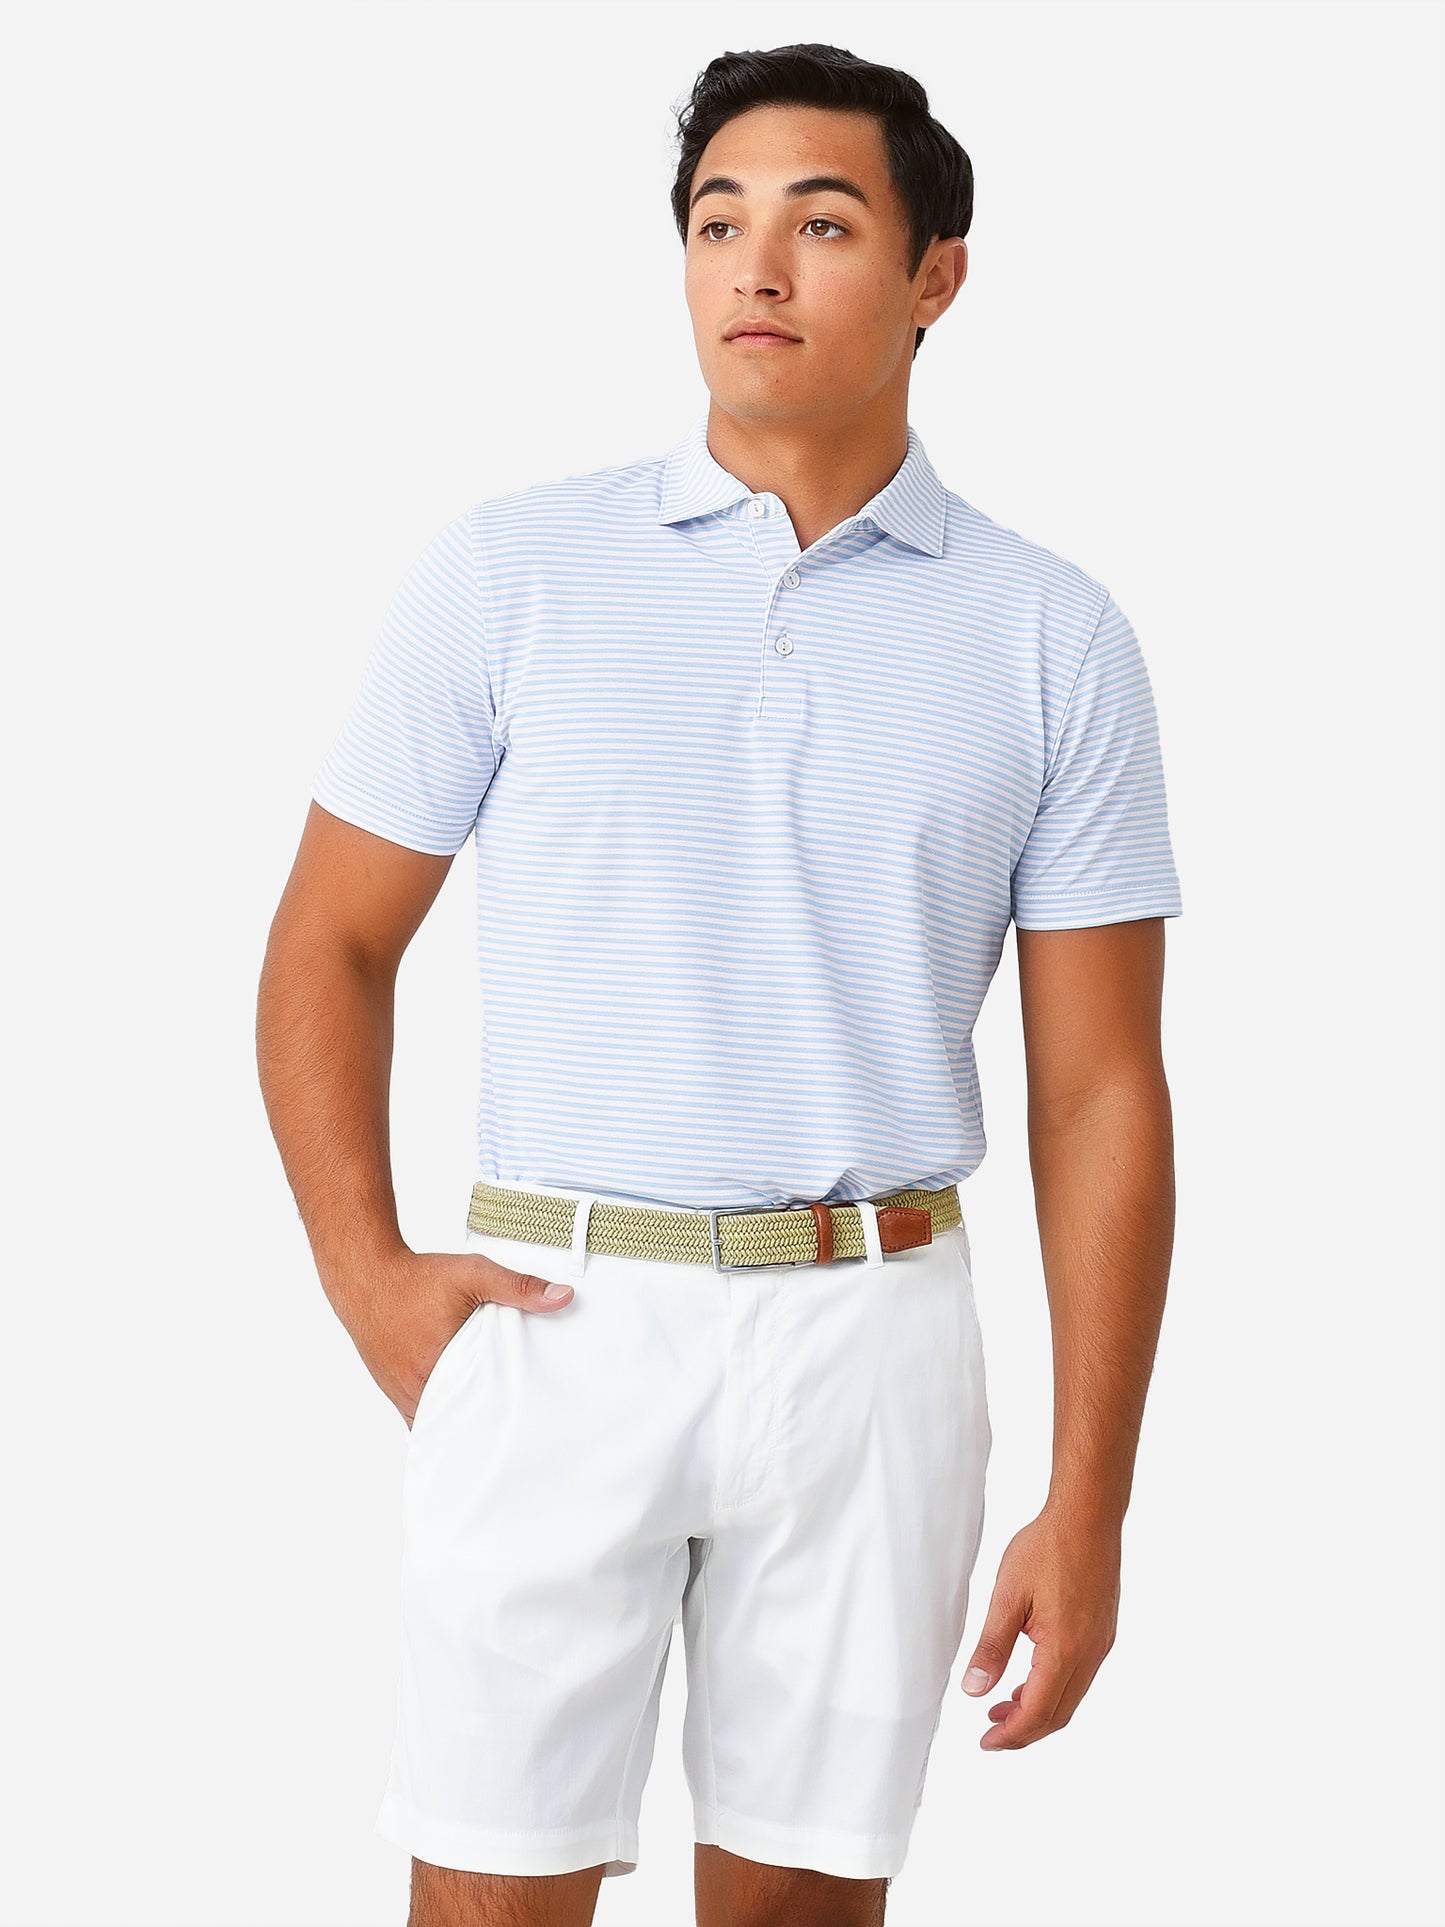 Peter Millar Crown Crafted Men's Mood Performance Mesh Polo